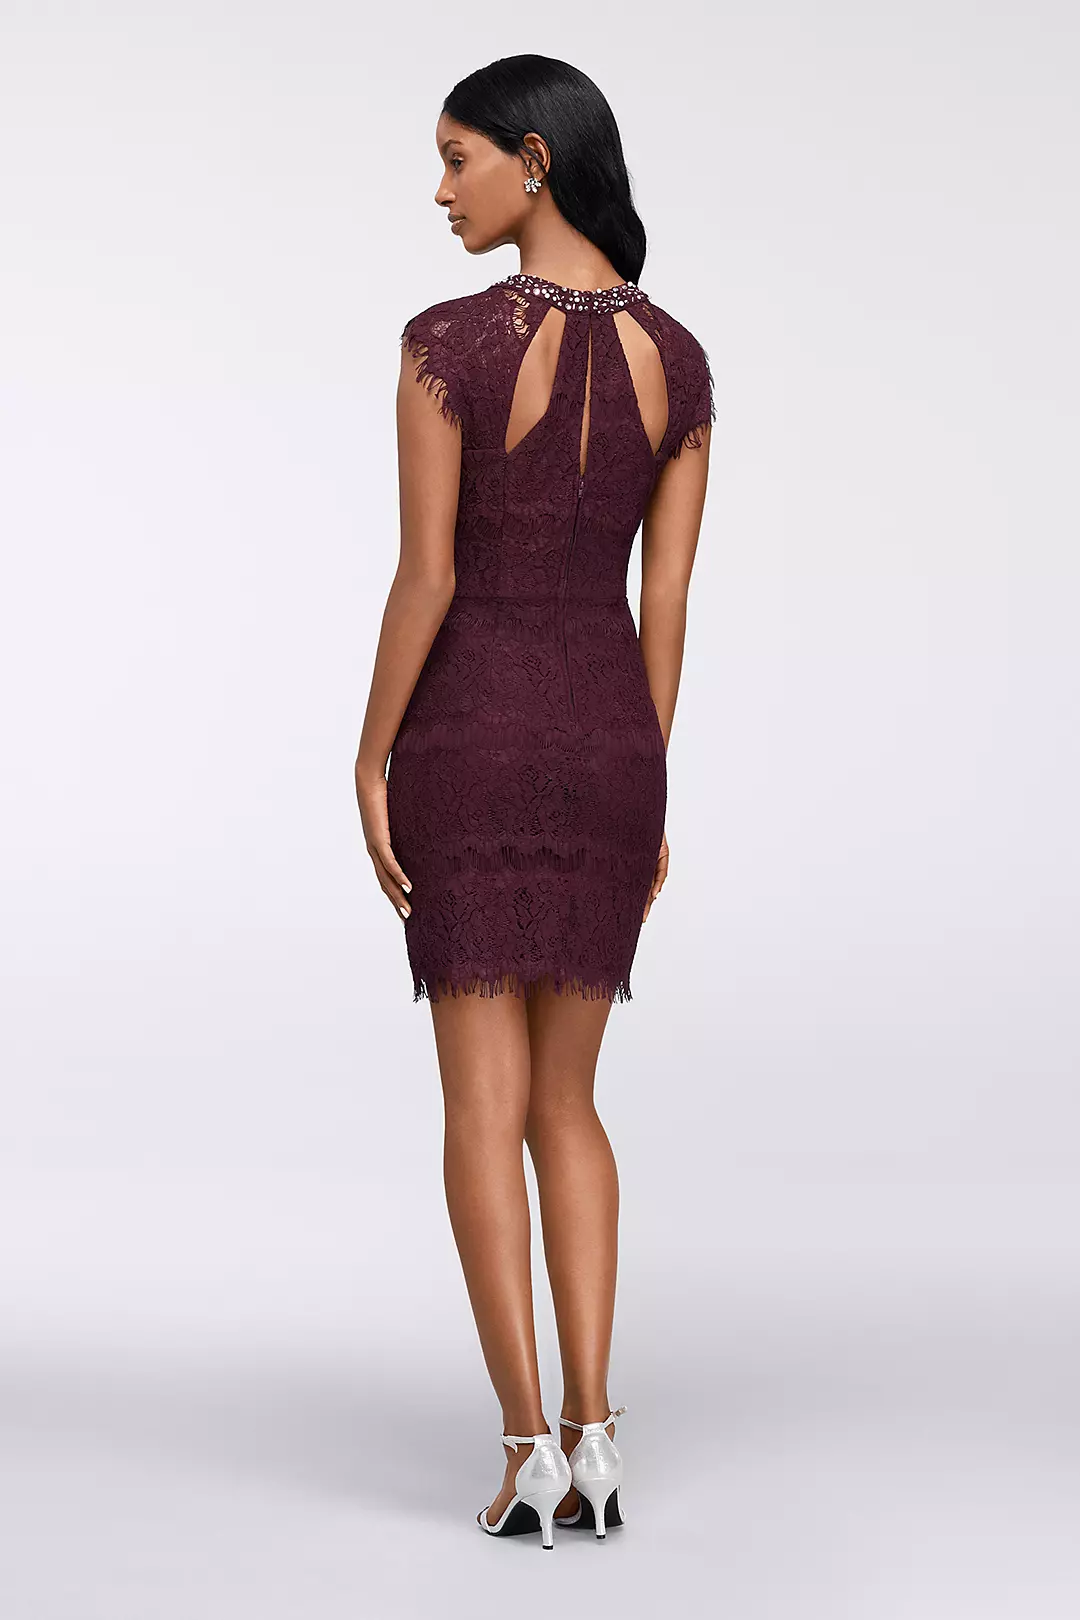 Short Lace Homecoming Dress with Back Cutouts Image 2